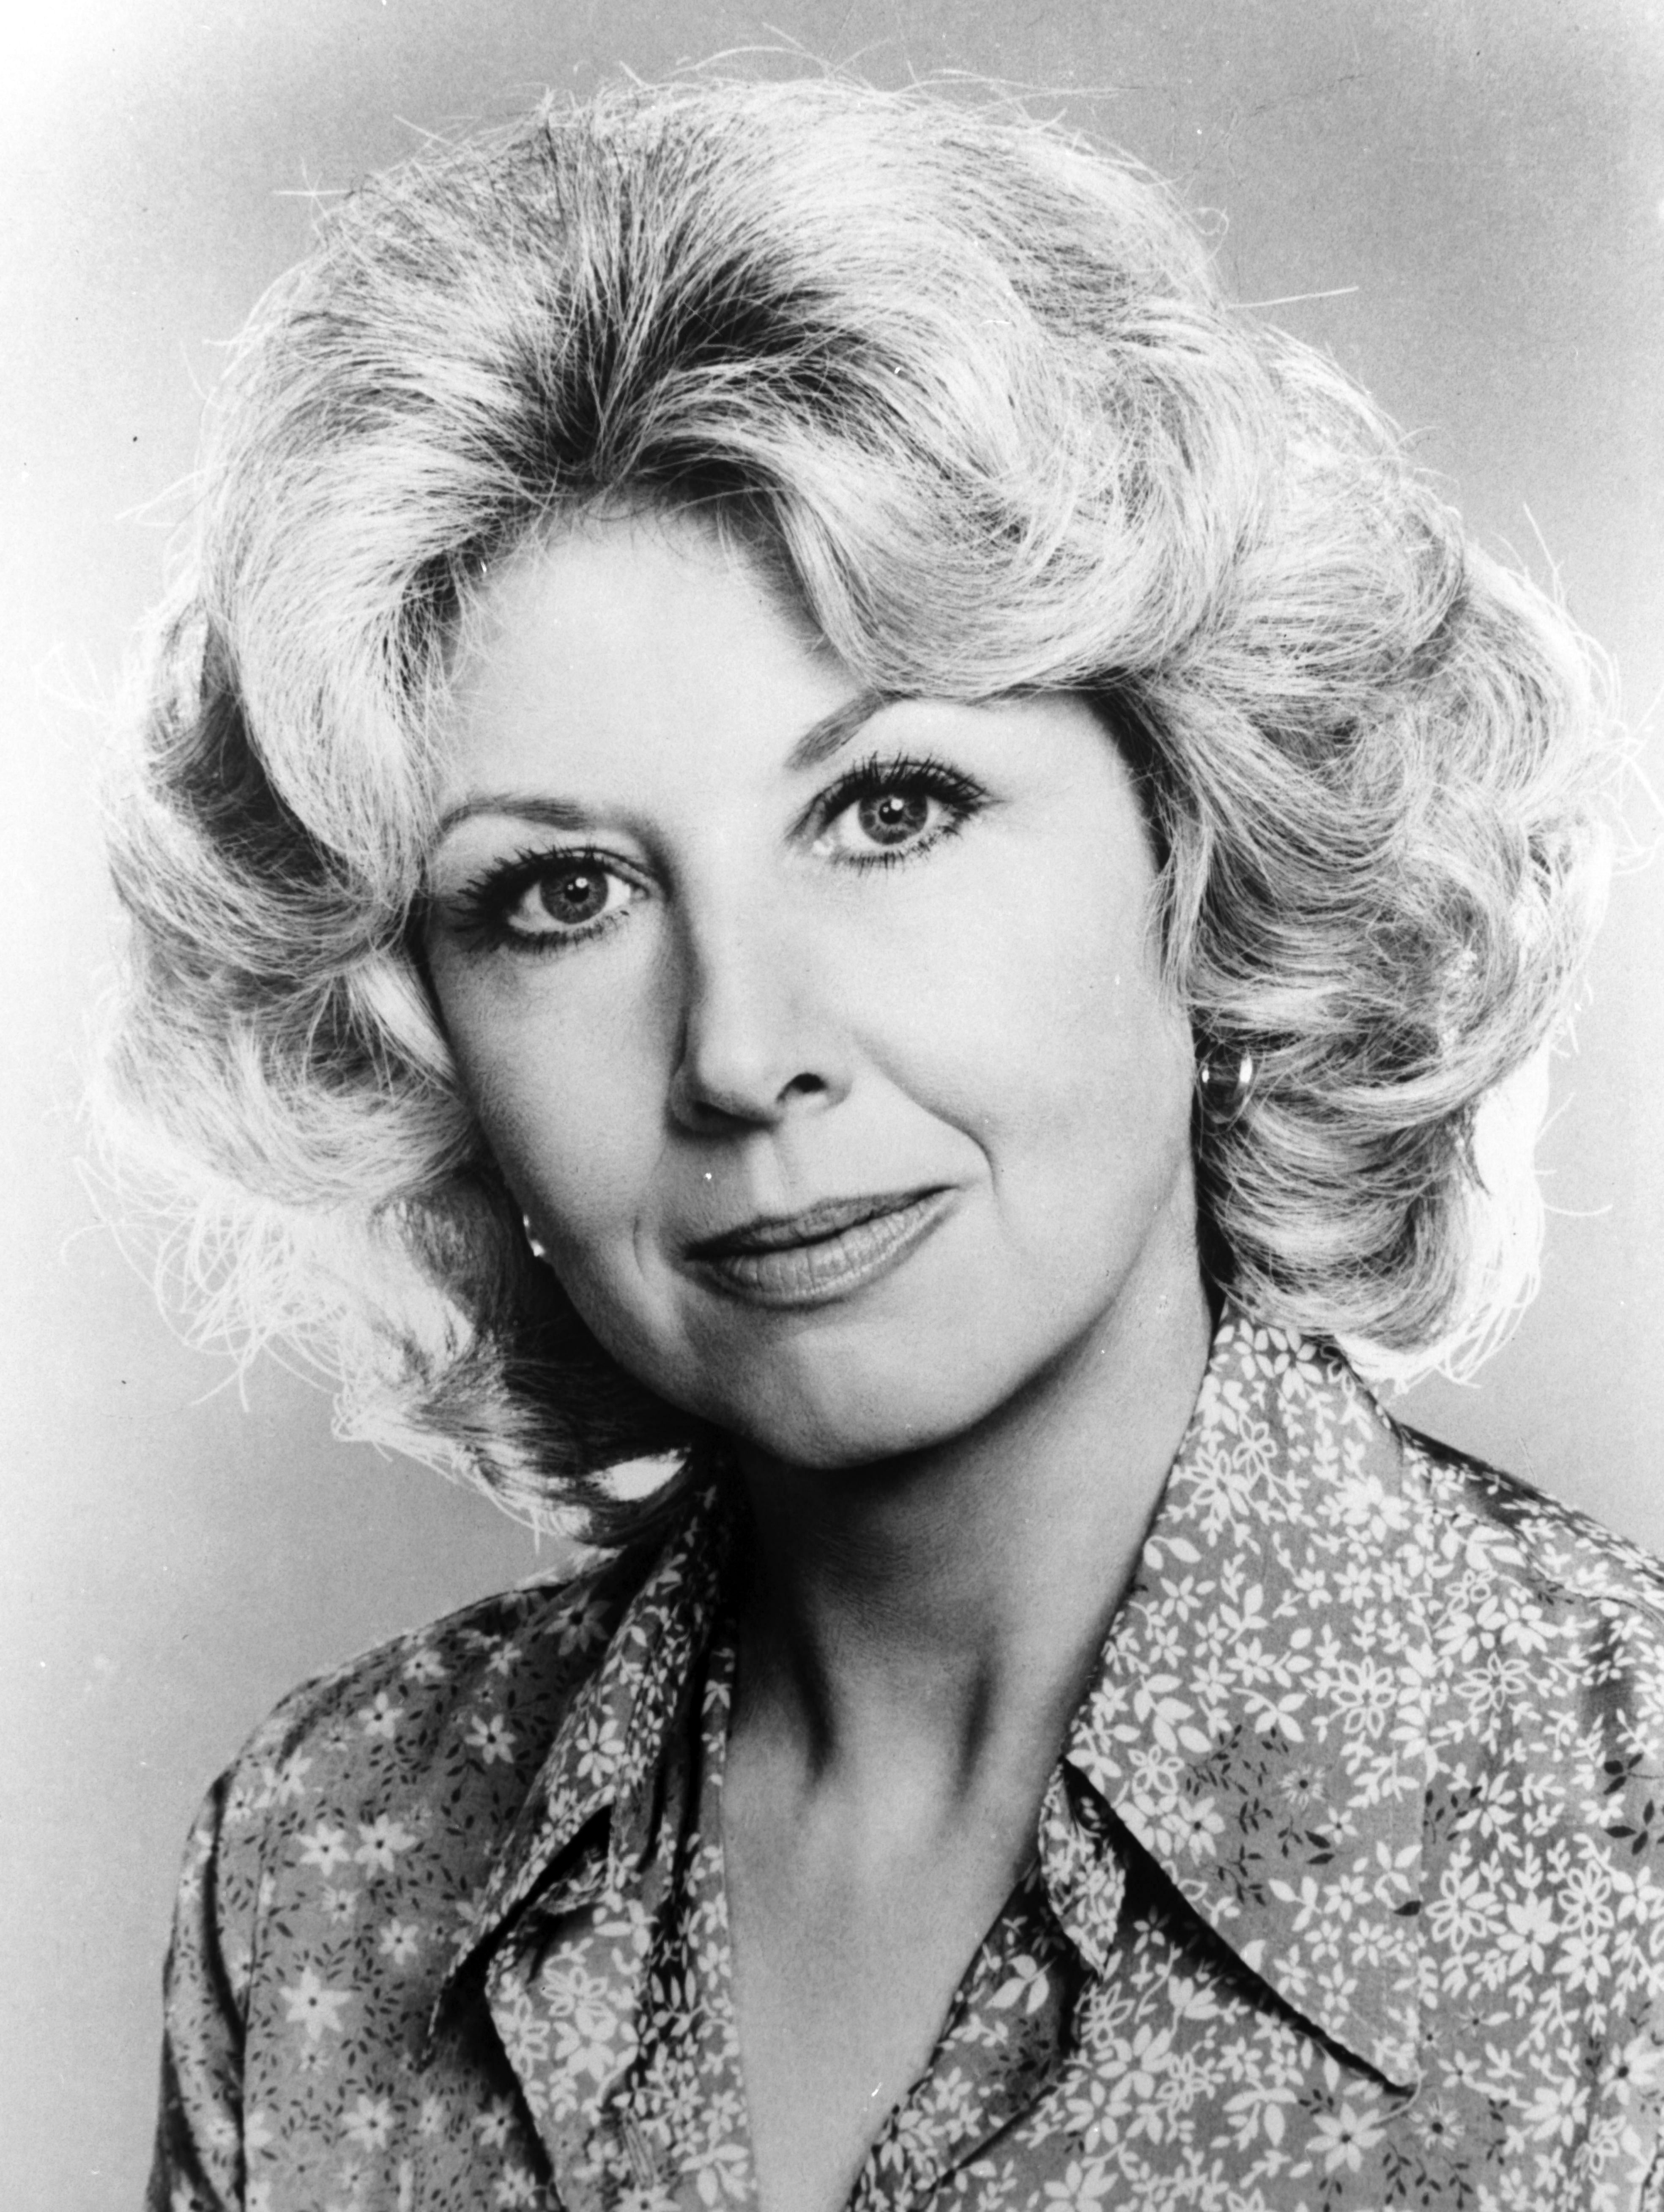 Michael Learned poses for a portrait in the 1970s. | Source: Getty Images